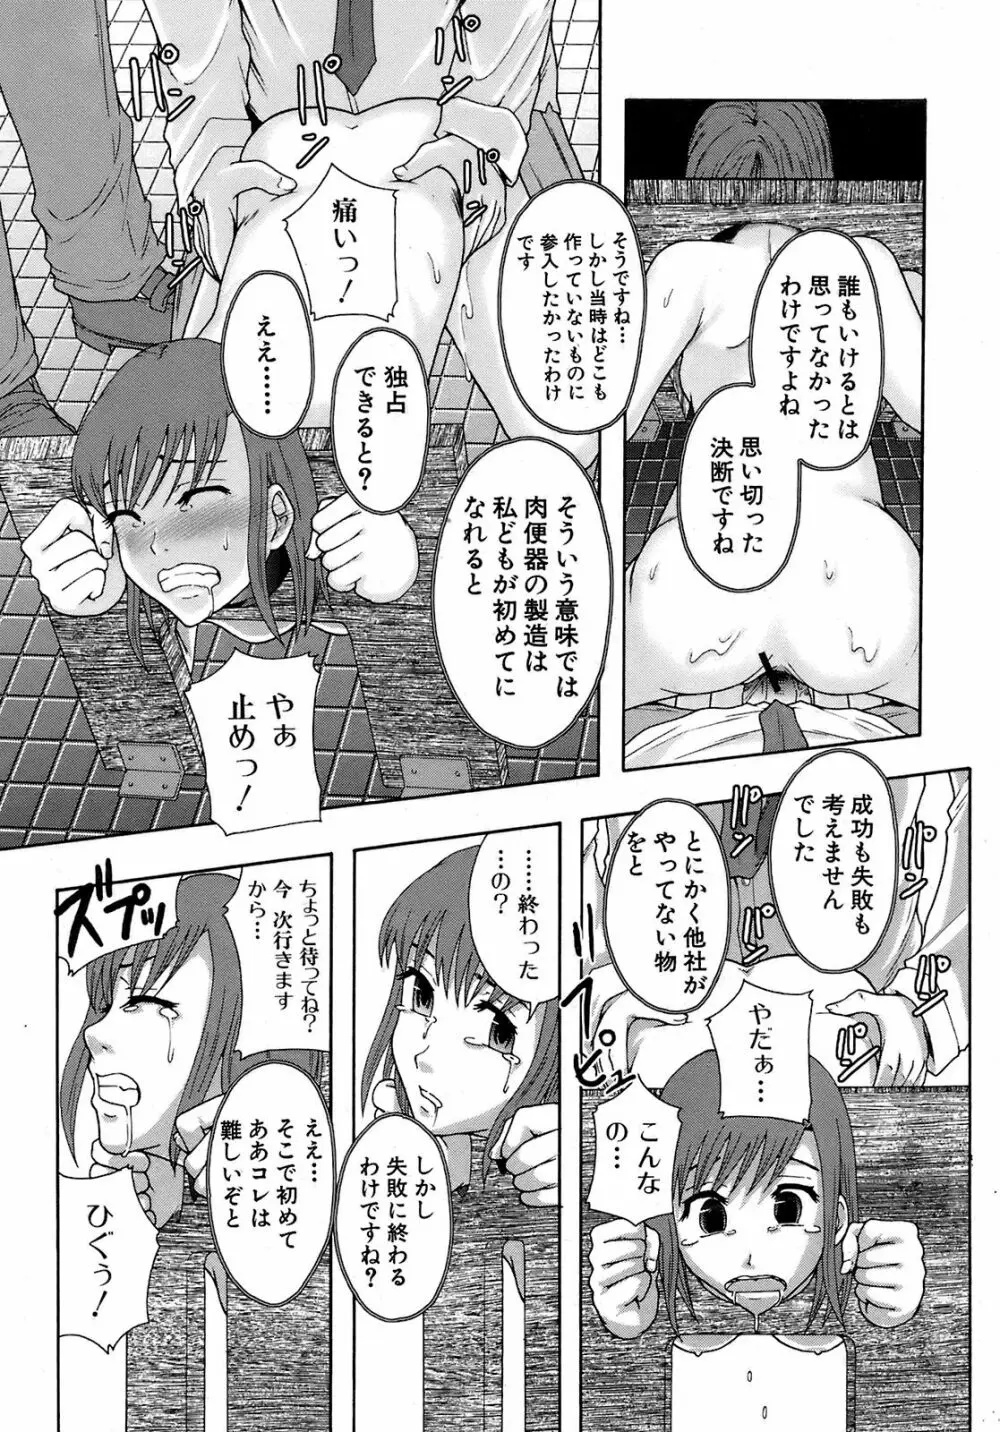 Buster Comic 9 Page.384